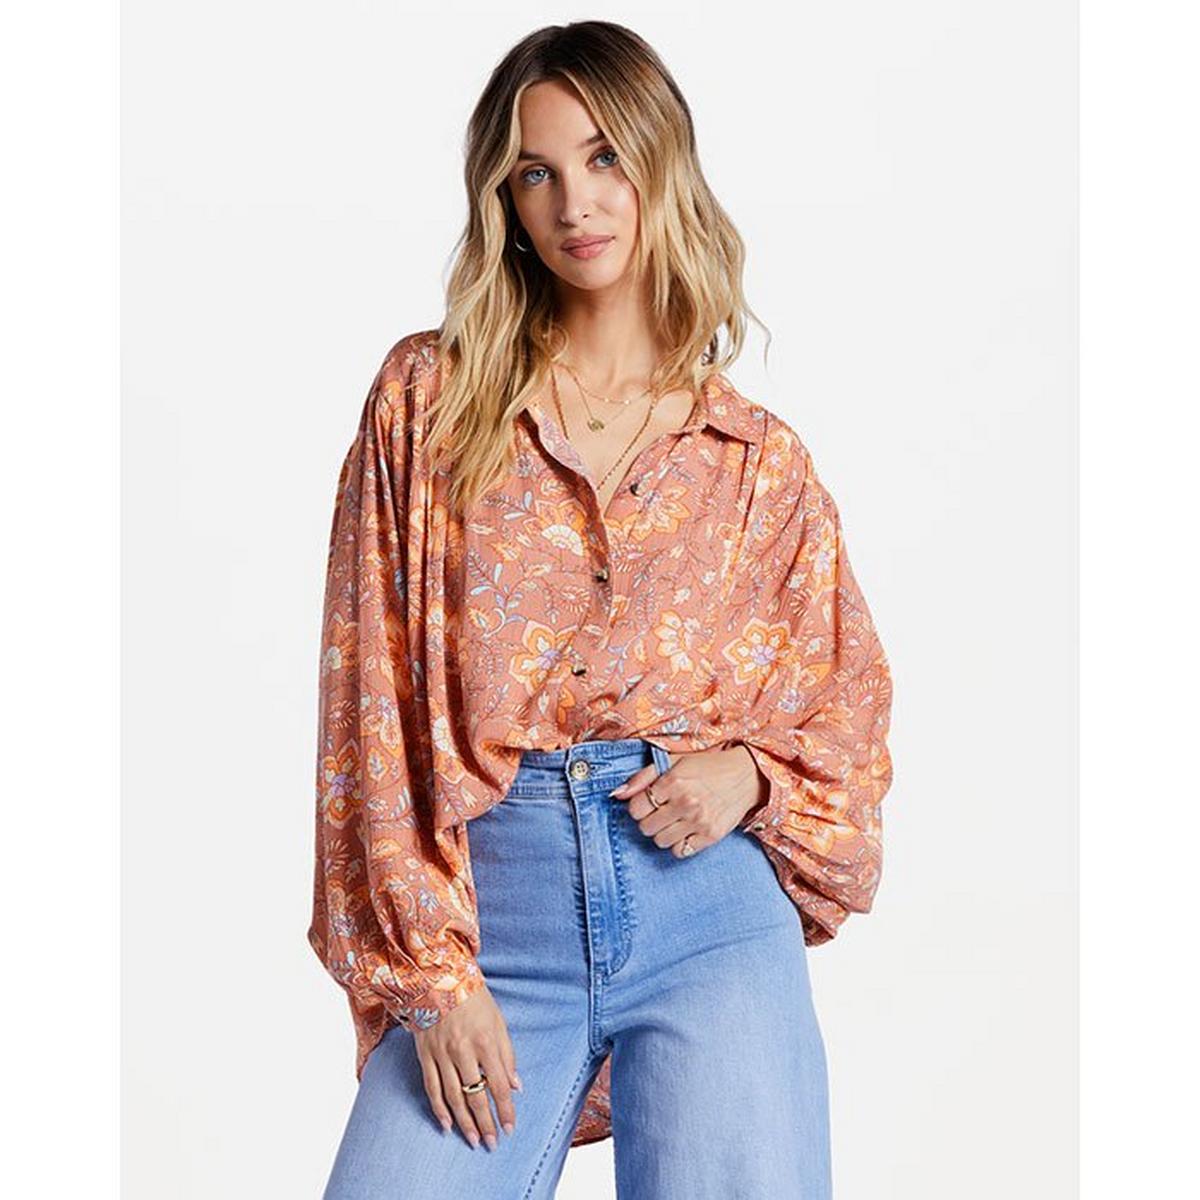 Women's Day After Day Oversized Shirt